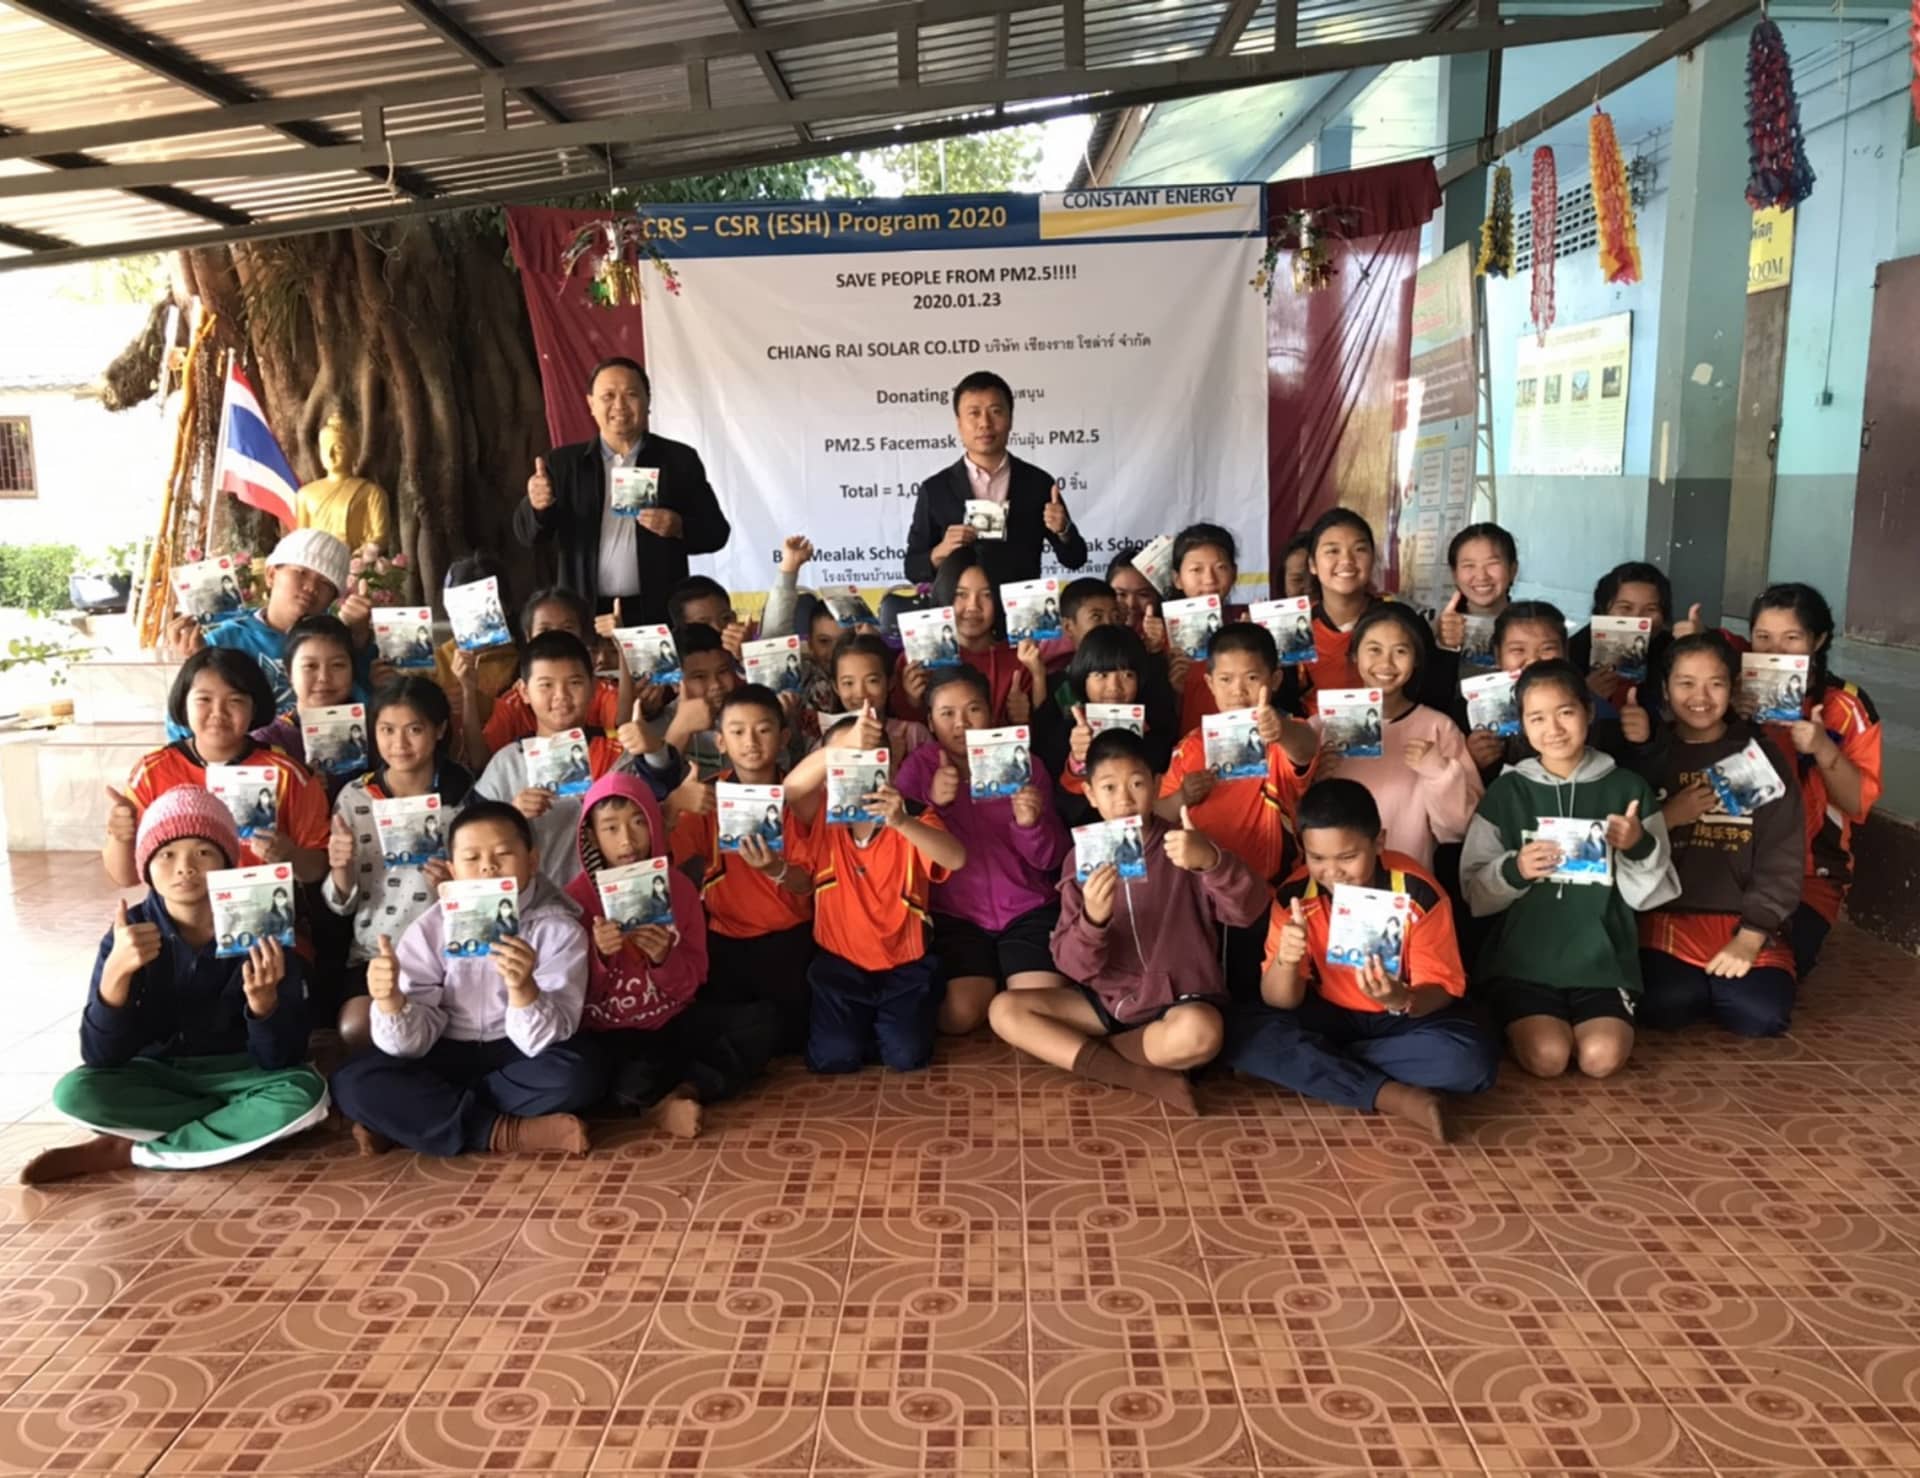 Read more about the article Constant Energy Donates 1000 Masks to Chiang Rai Province Village to Mitigate Effect of PM2.5 Pollution